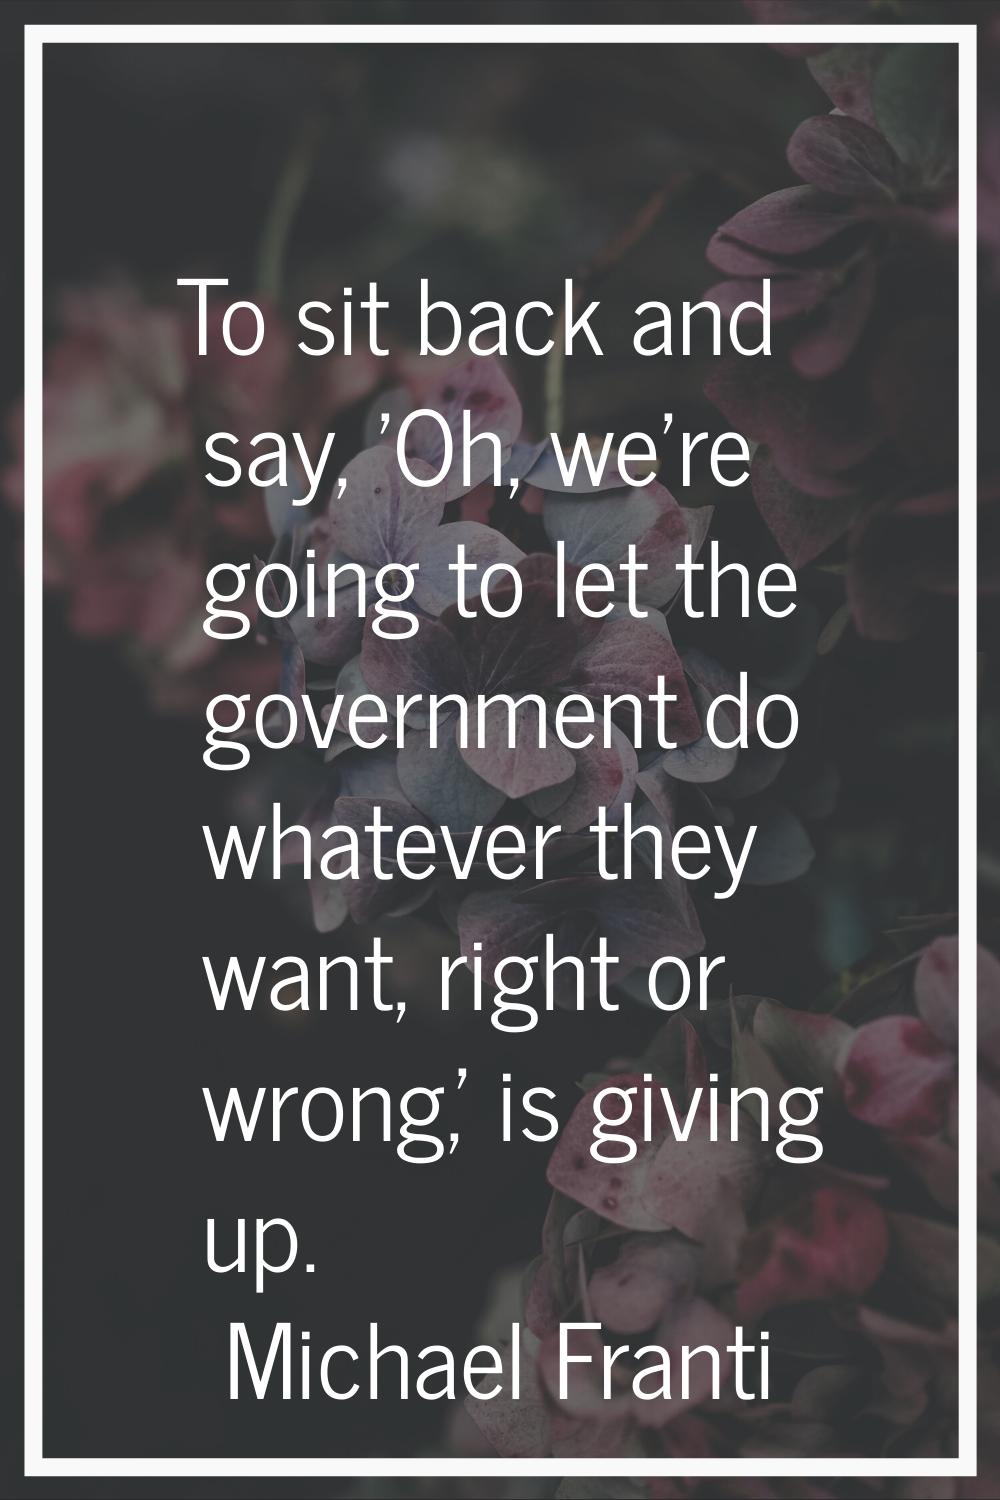 To sit back and say, 'Oh, we're going to let the government do whatever they want, right or wrong,'